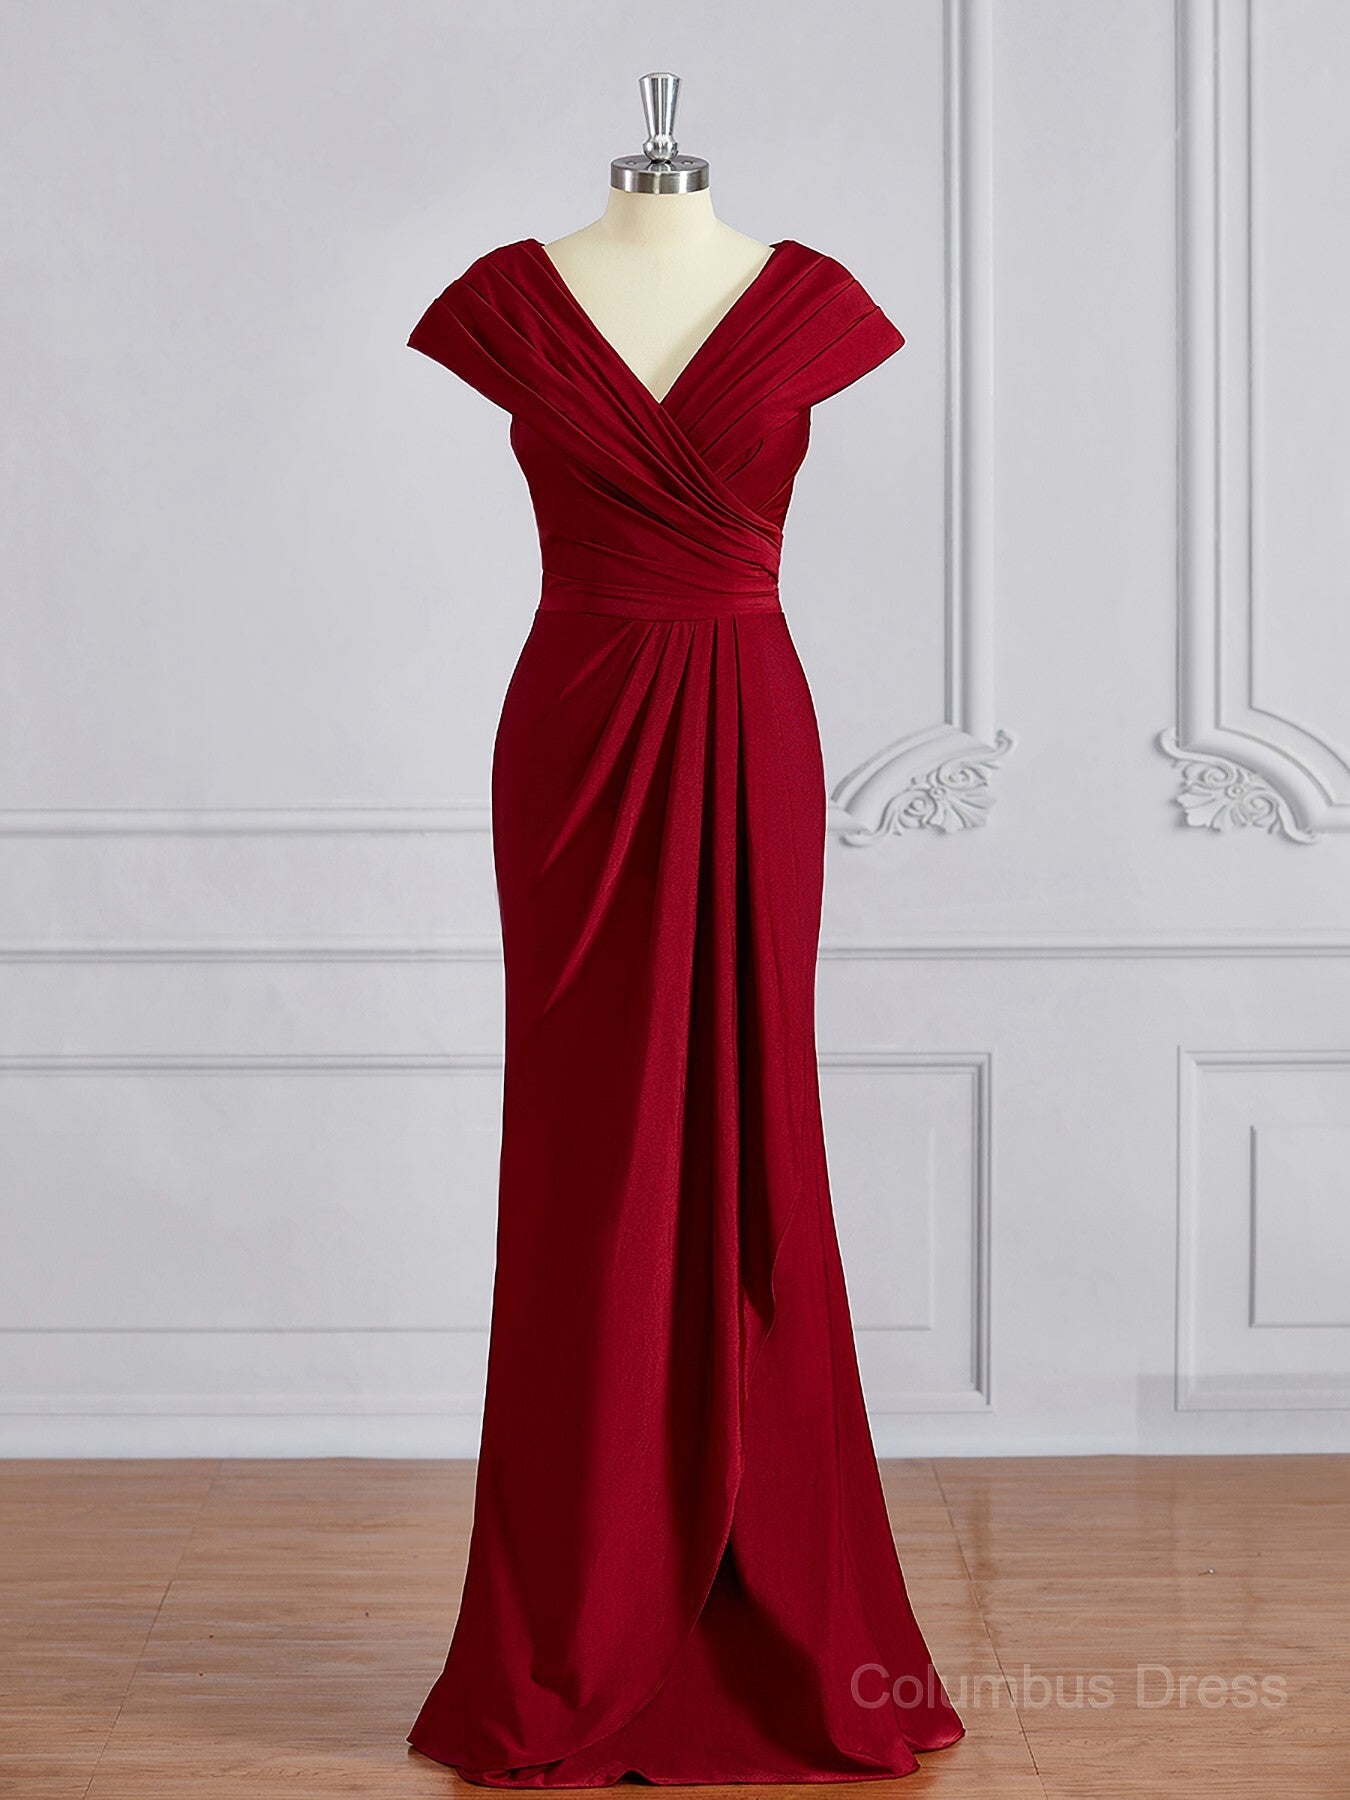 Prom Dress Chicago, Sheath/Column V-neck Floor-Length Jersey Mother of the Bride Dresses With Ruffles